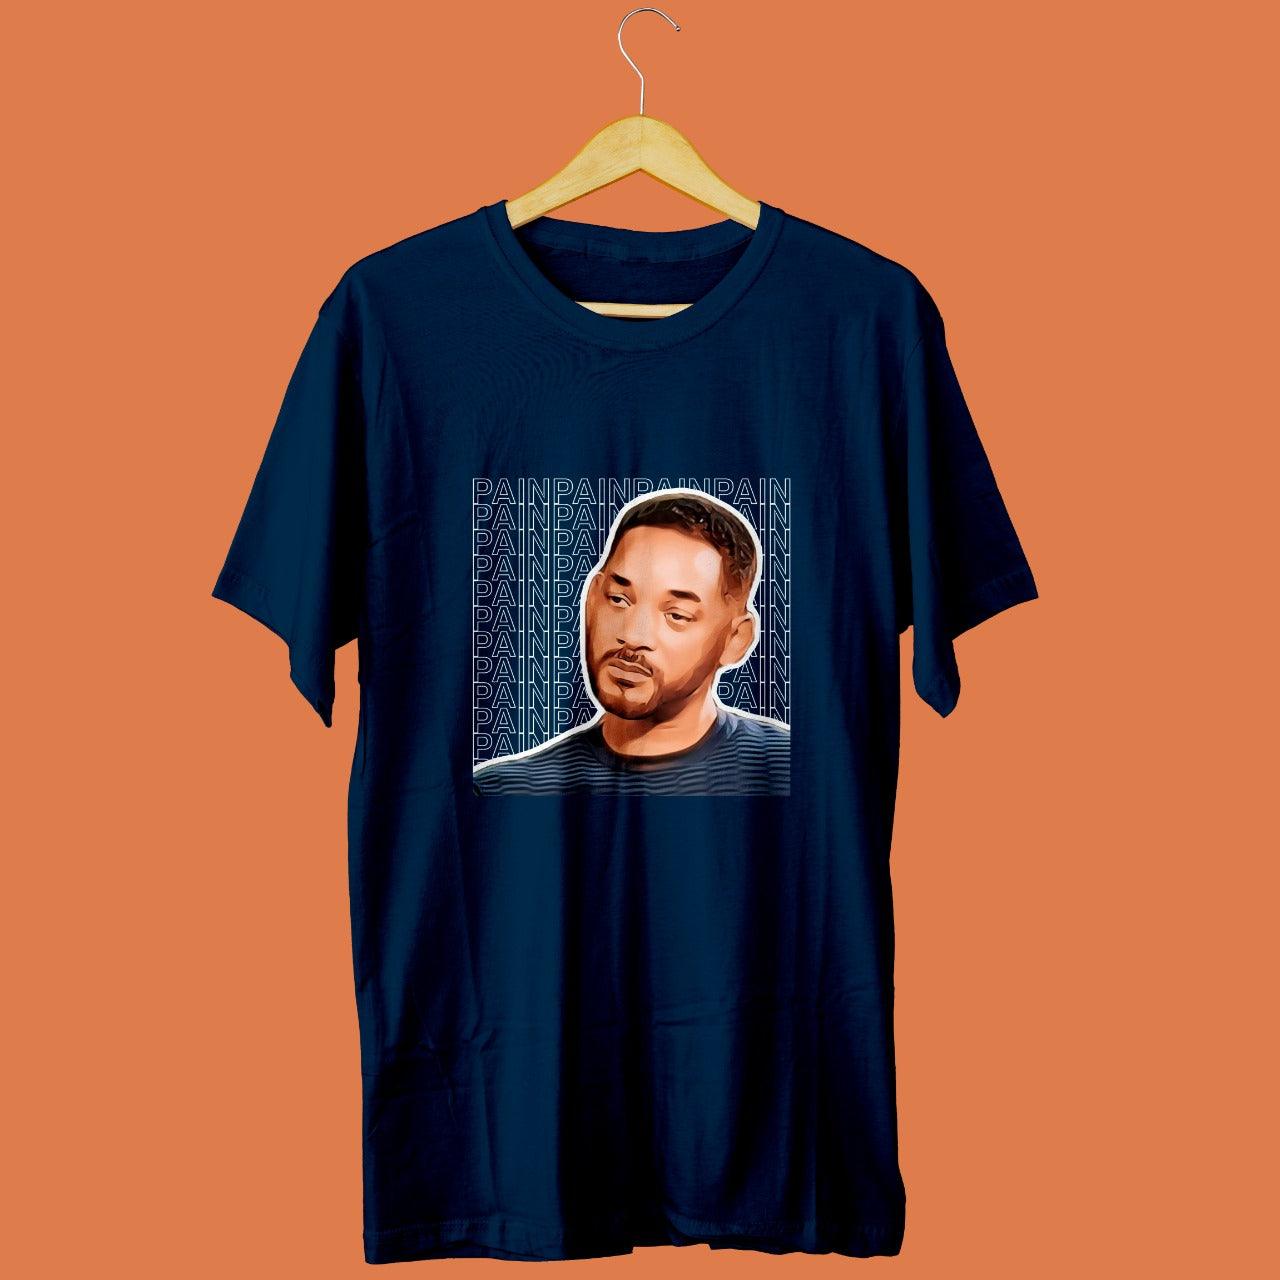 dark blue tshirt with picture of sad will smith printed on it with pain written multiple times in the background, relatable memes